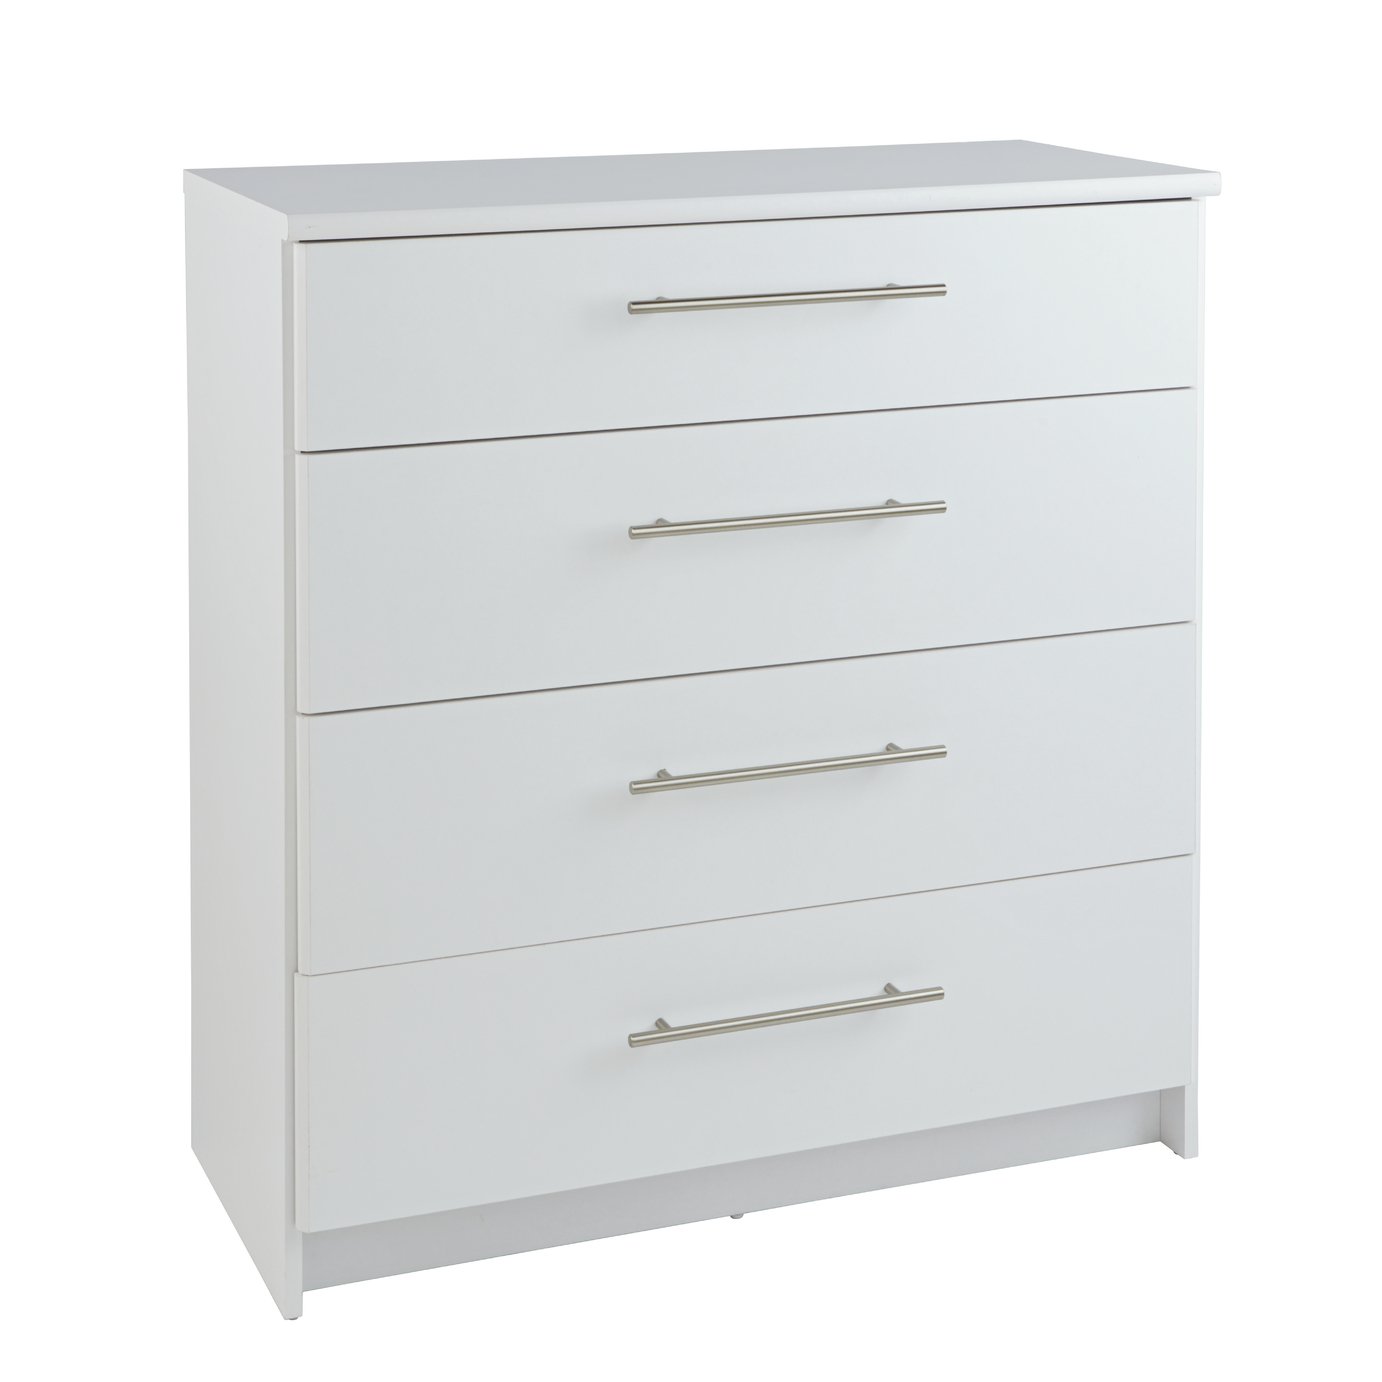 Argos Home Normandy XL 4 Drawer Chest of Drawers - White